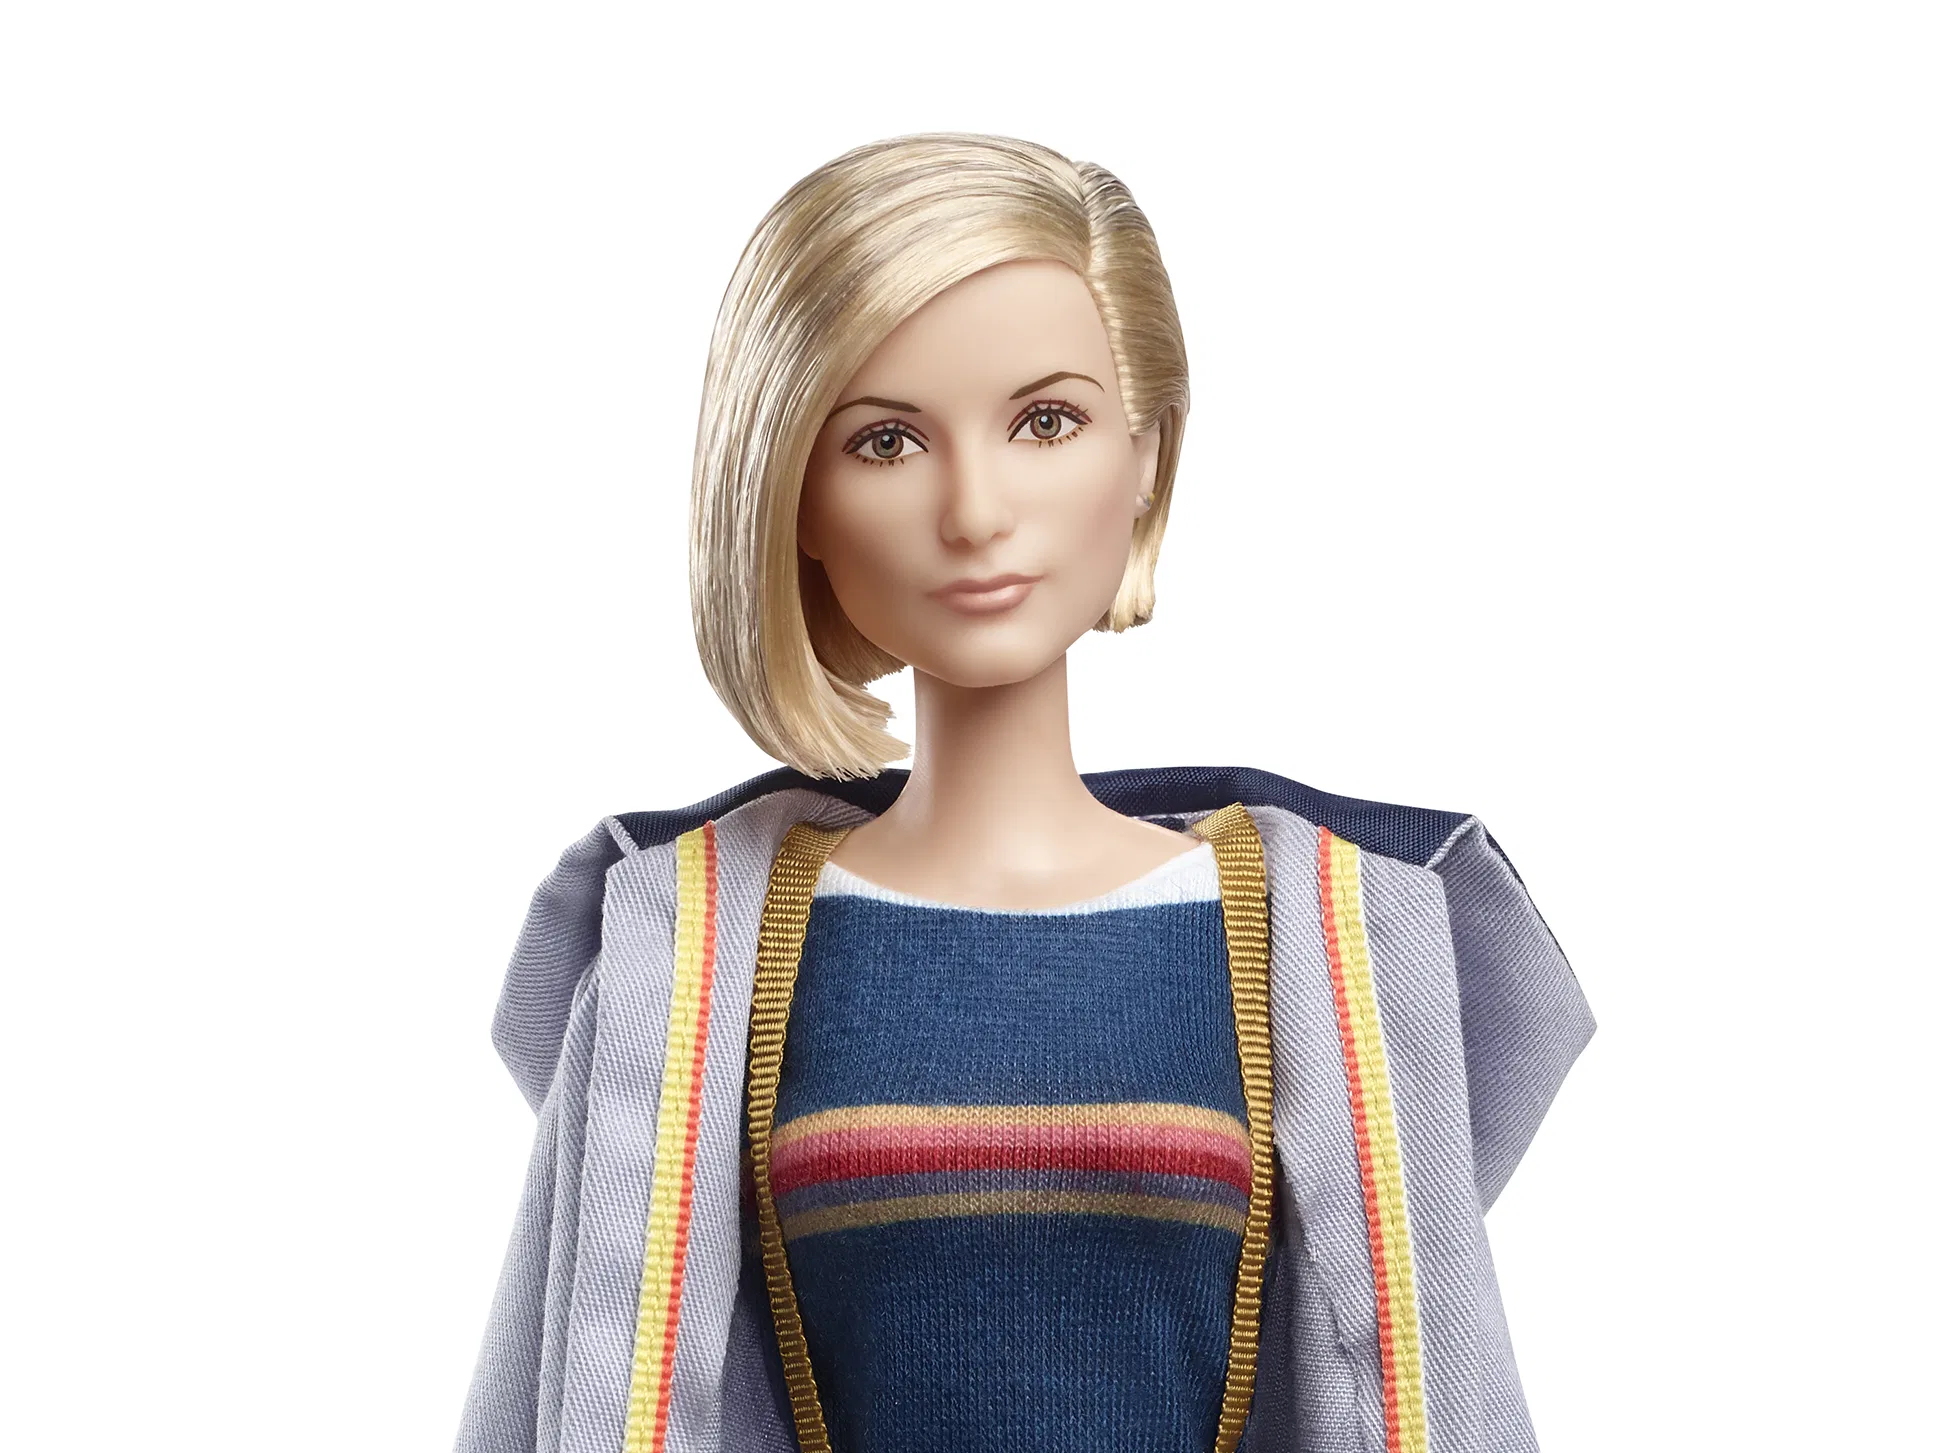 General 1937x1453 doll toys white background simple background Doctor Who The Doctor Jodie Whittaker